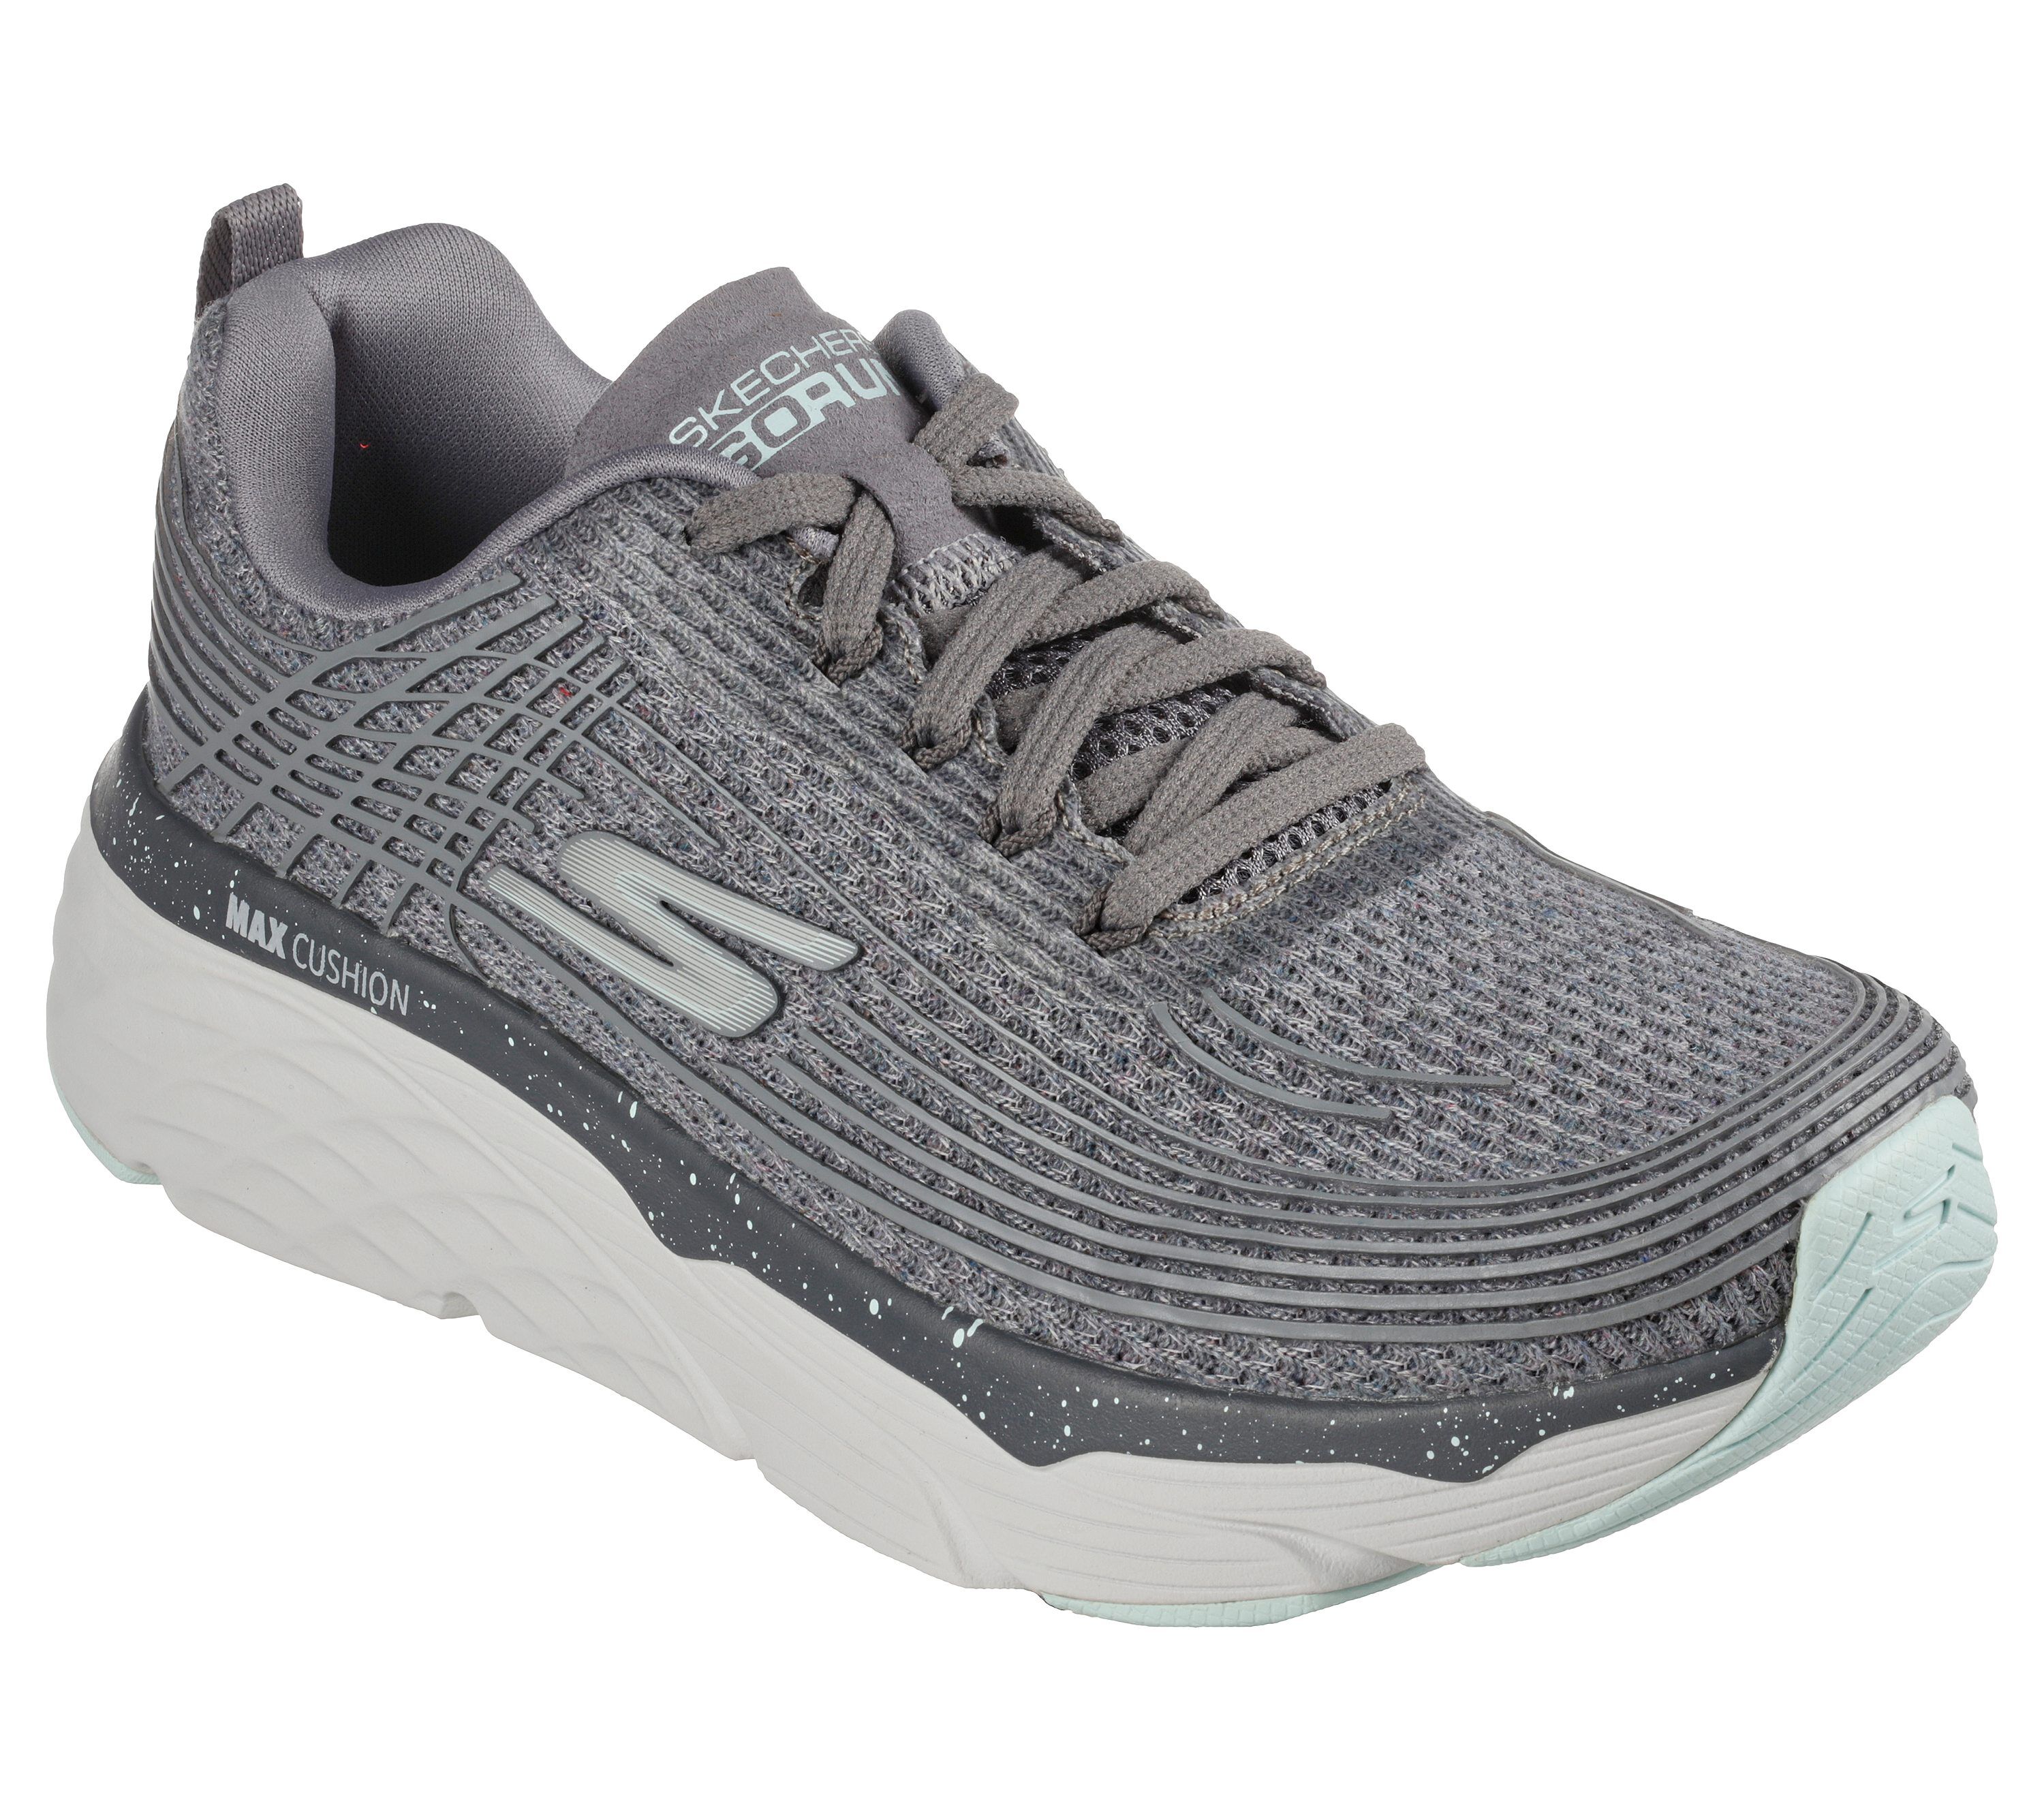 skechers performance shoes